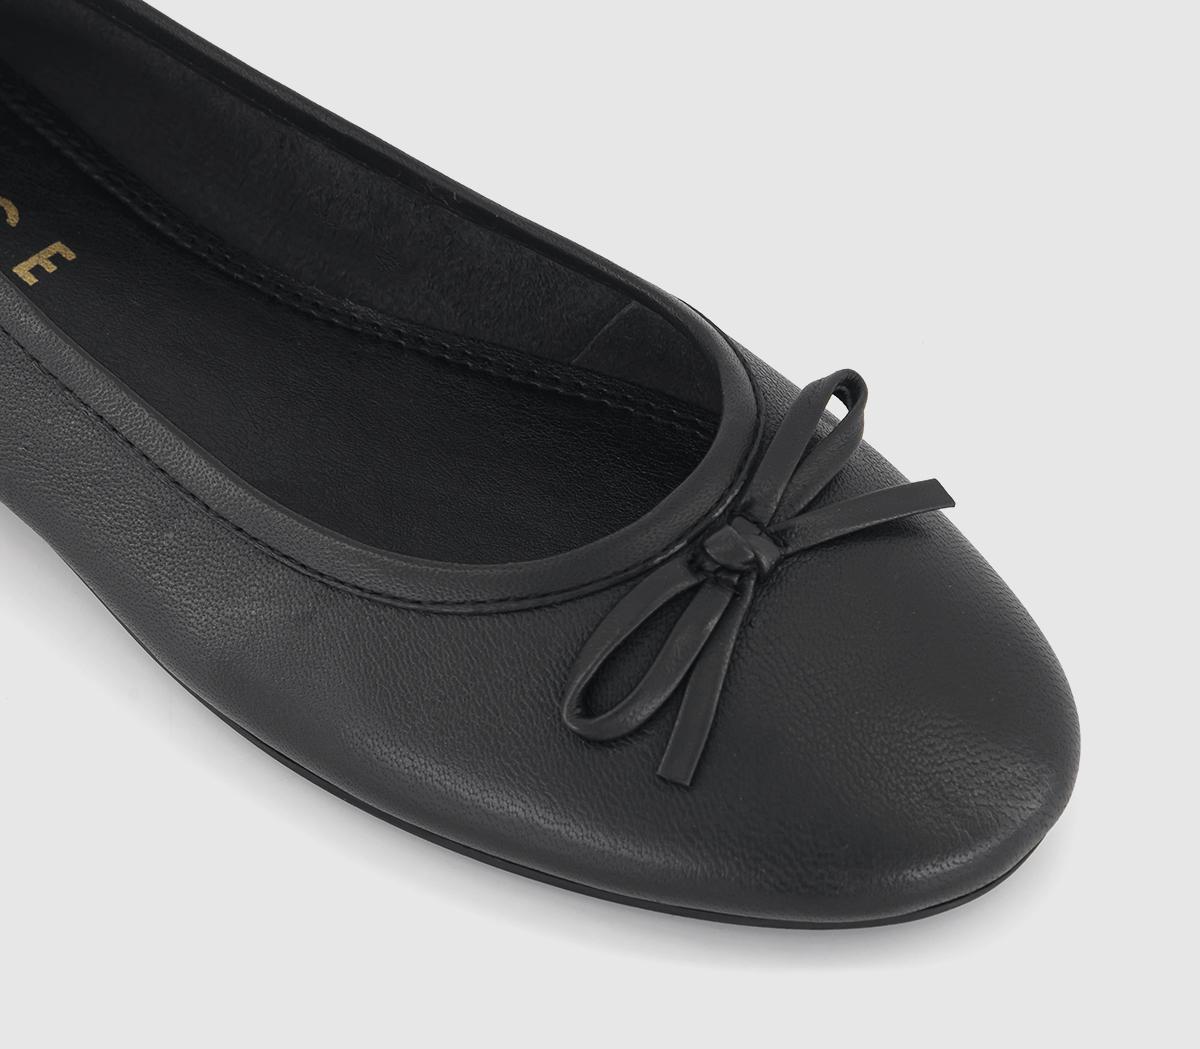 OFFICE Frazzle Leather Ballerina Shoes Black Leather - Flat Shoes for Women